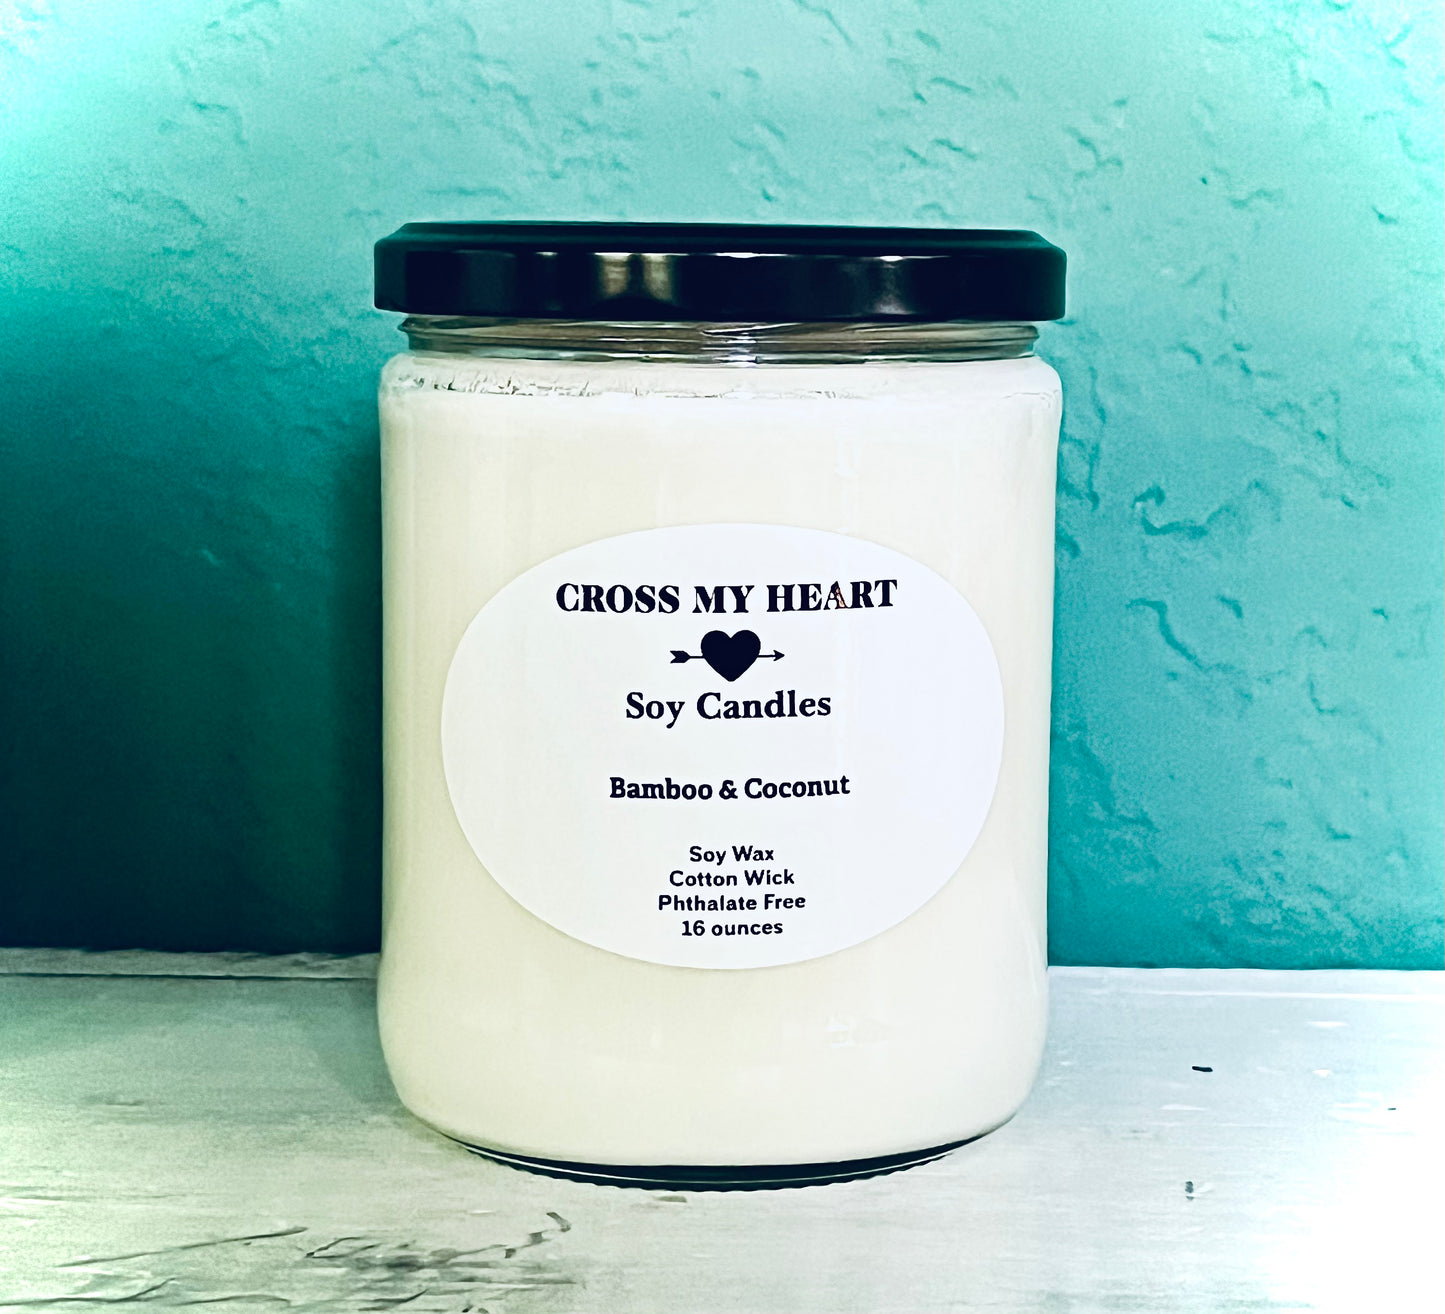 Bamboo & Coconut Soy Candle- 16 ounces